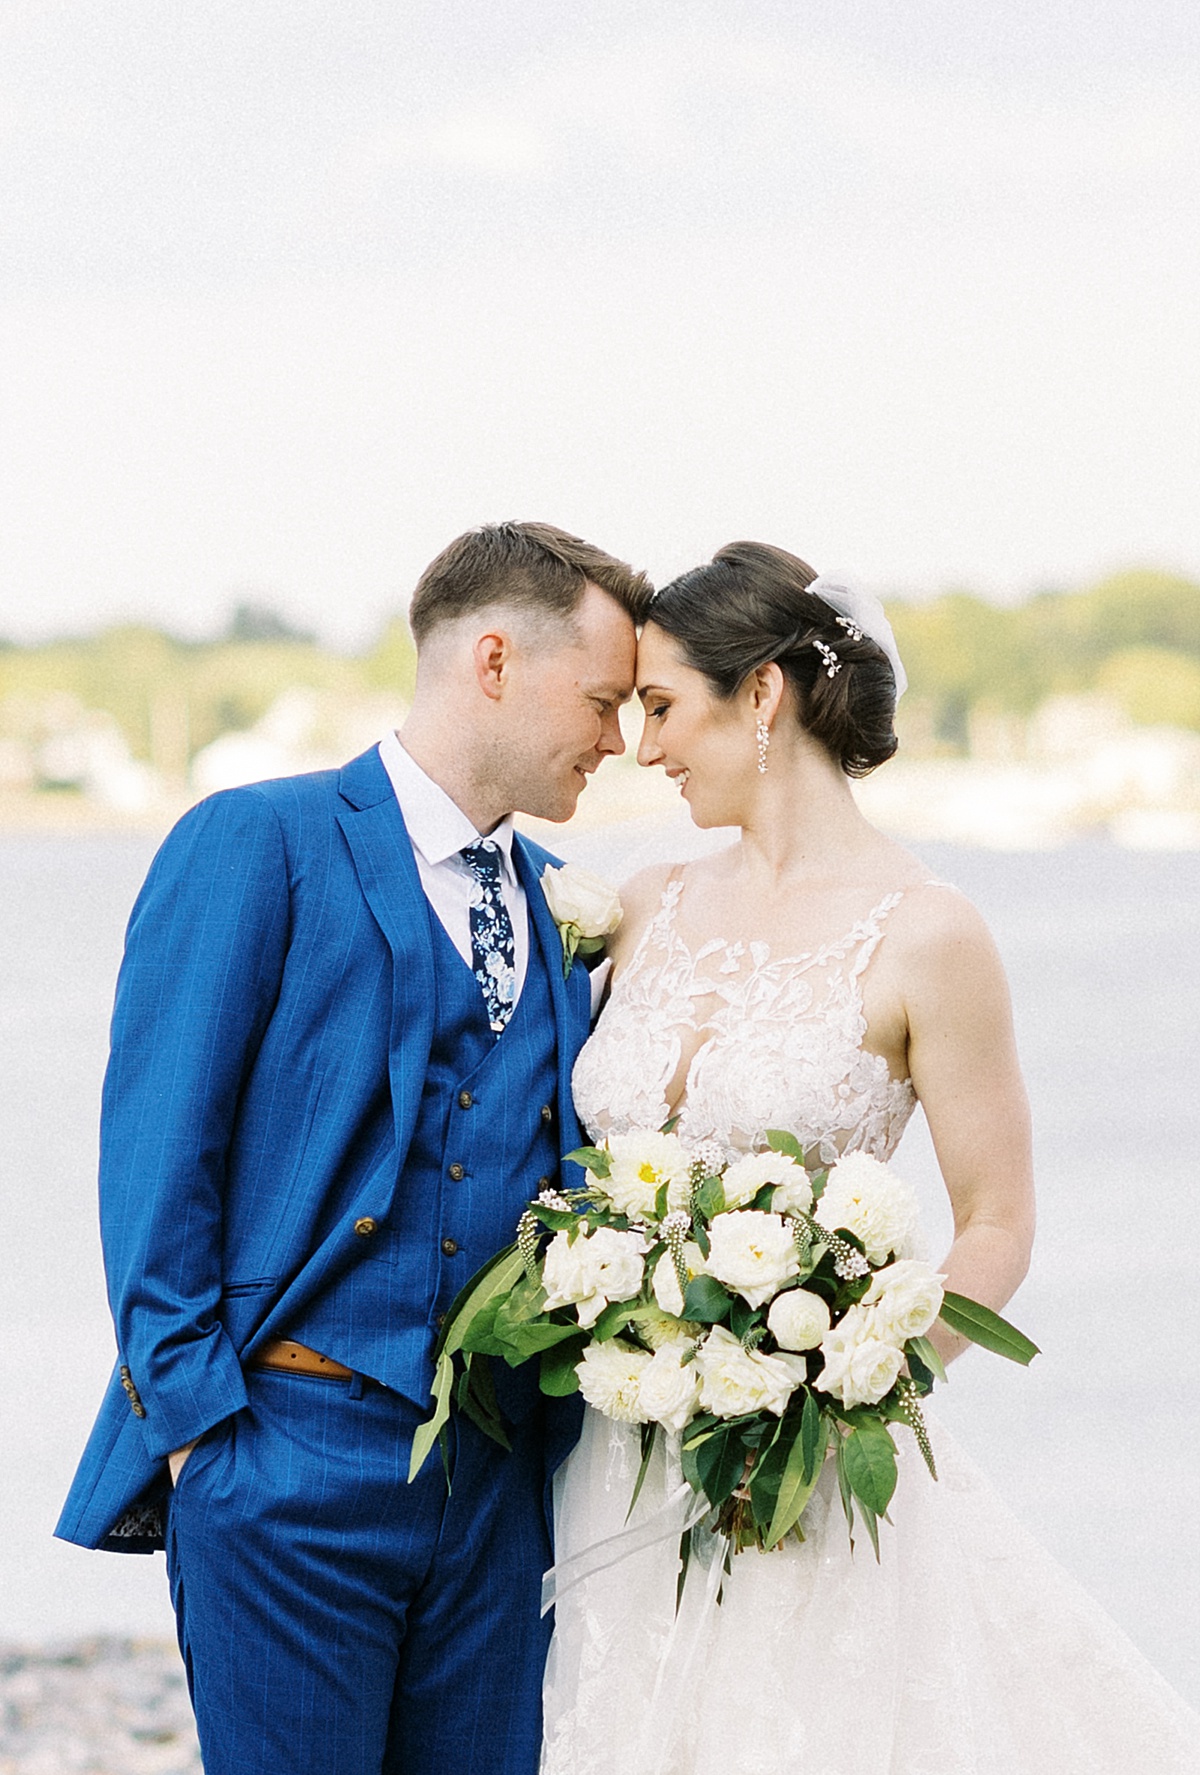 newlywed bride and groom in east coast wedding shot by Lynne Reznick Photography